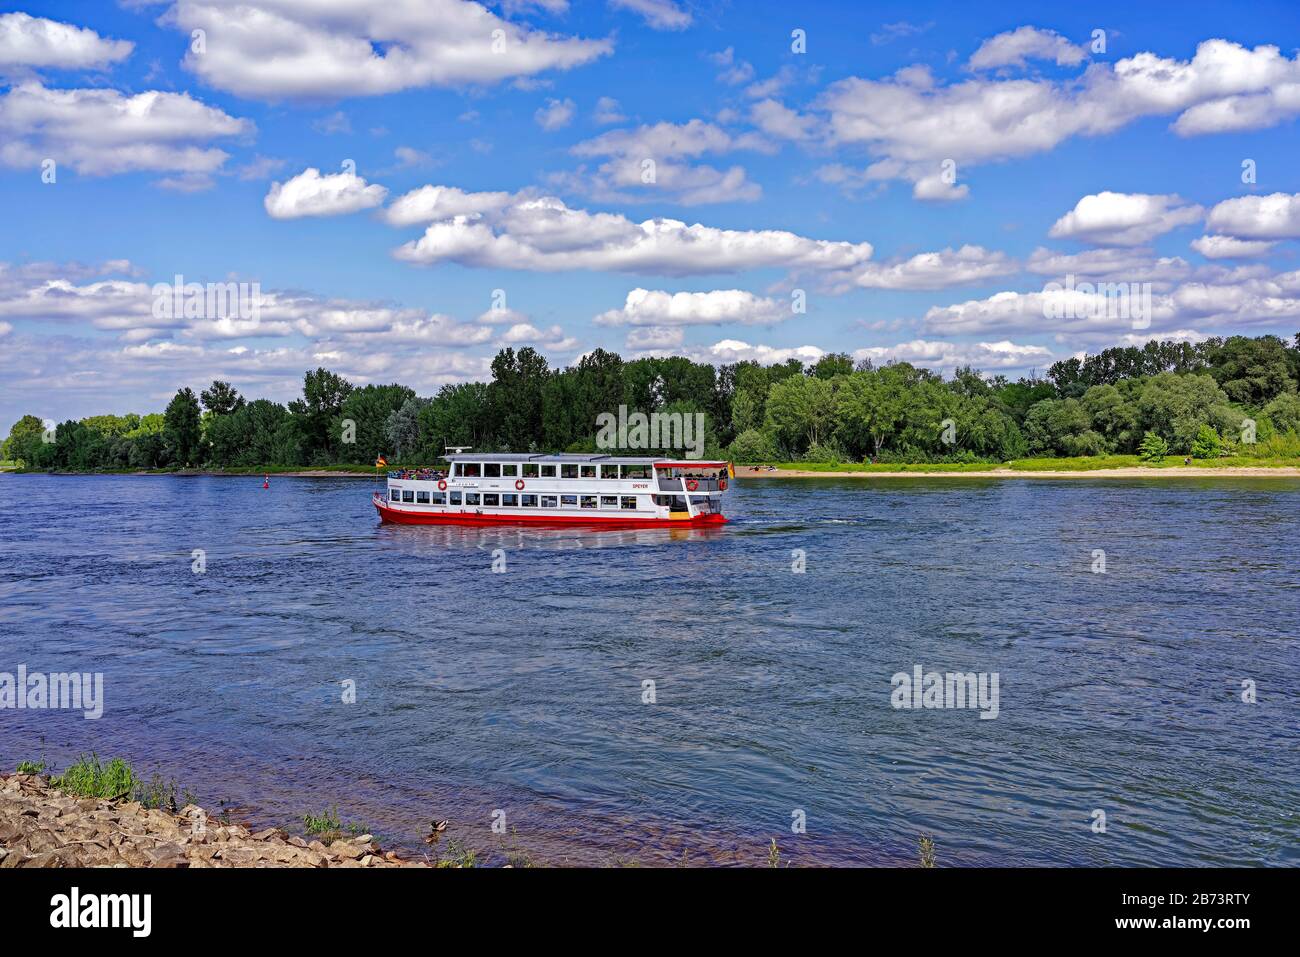 Germany, Rhineland-Palatinate, Speyer, Rhine avenue, SchUM town, river, the Rhine, round trip ship, plants, trees, people, people, place of interest, Stock Photo